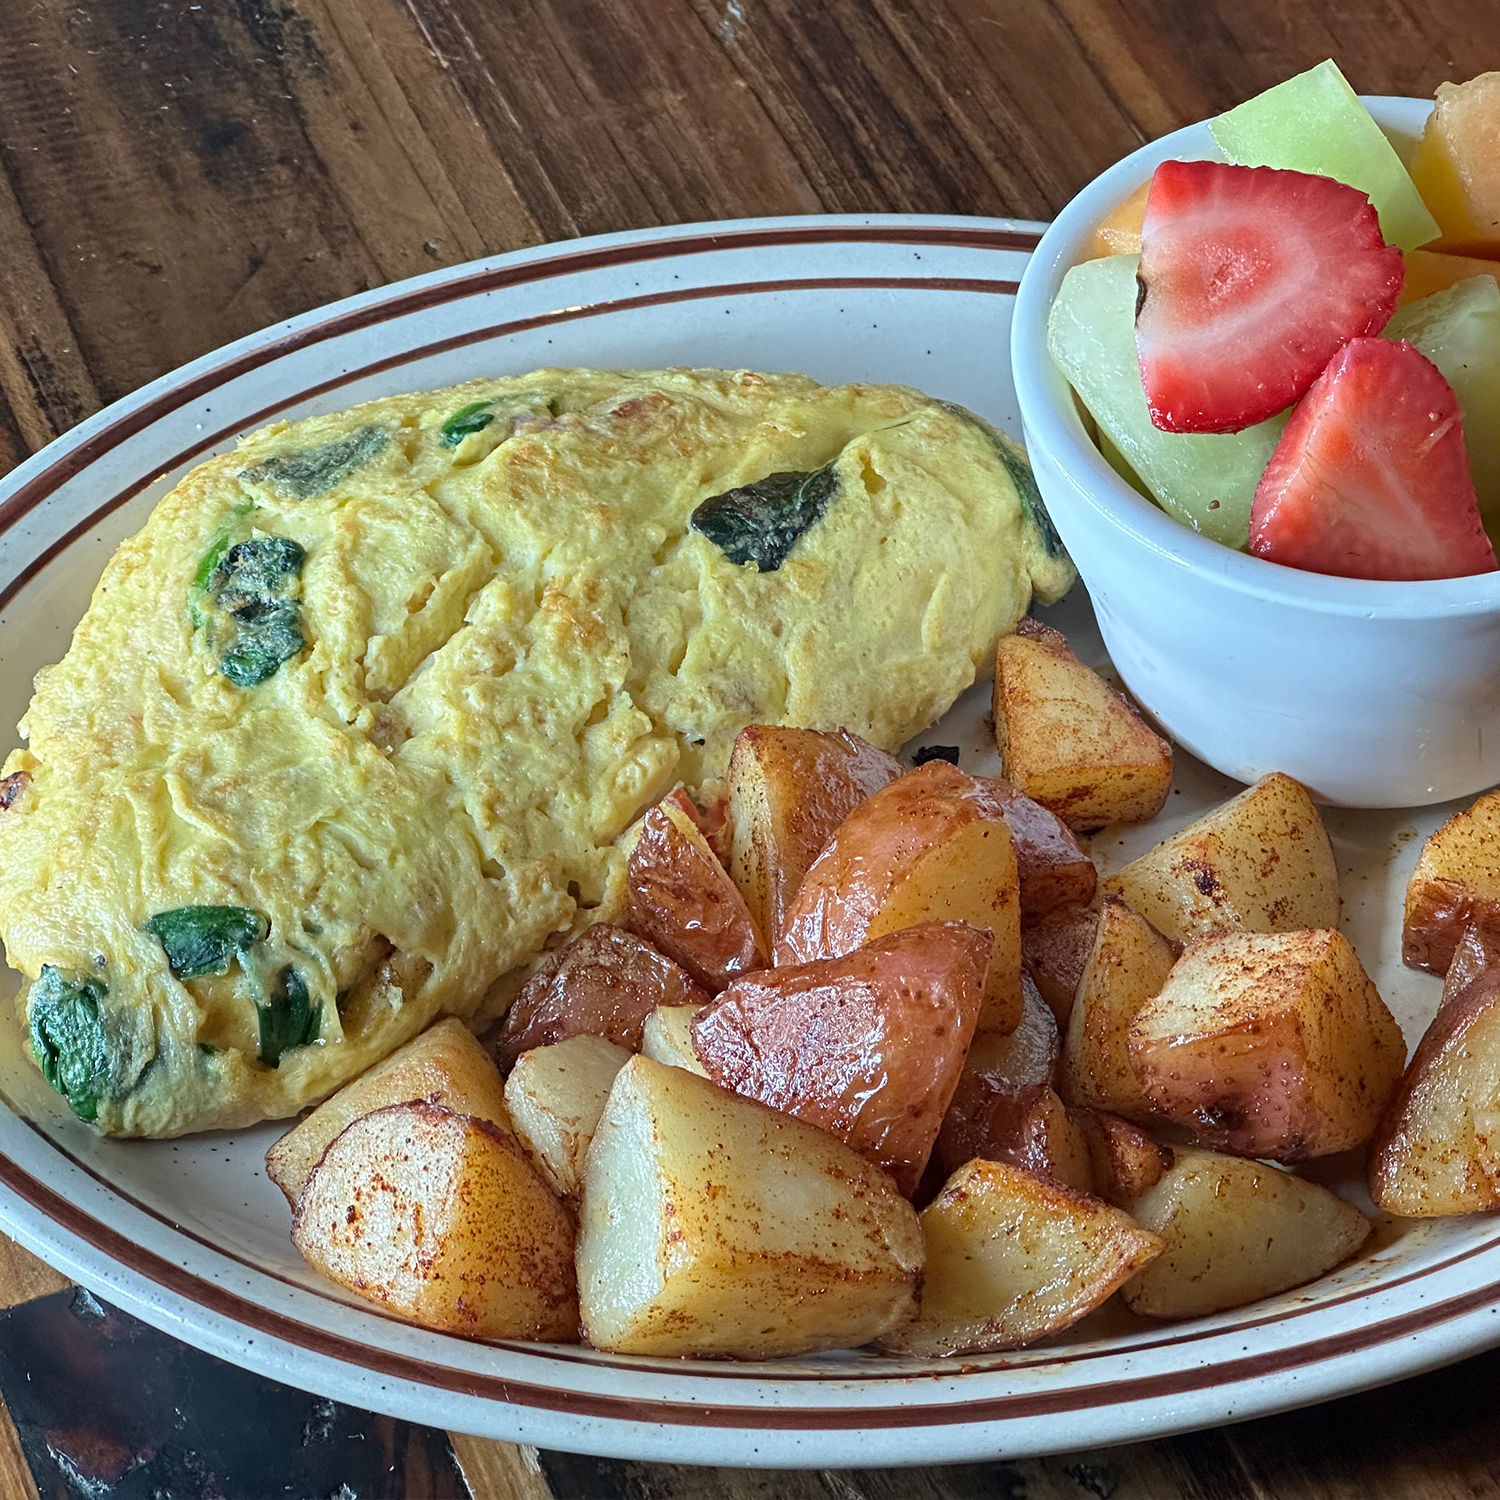 Feta Cheese & Spinach Omelet